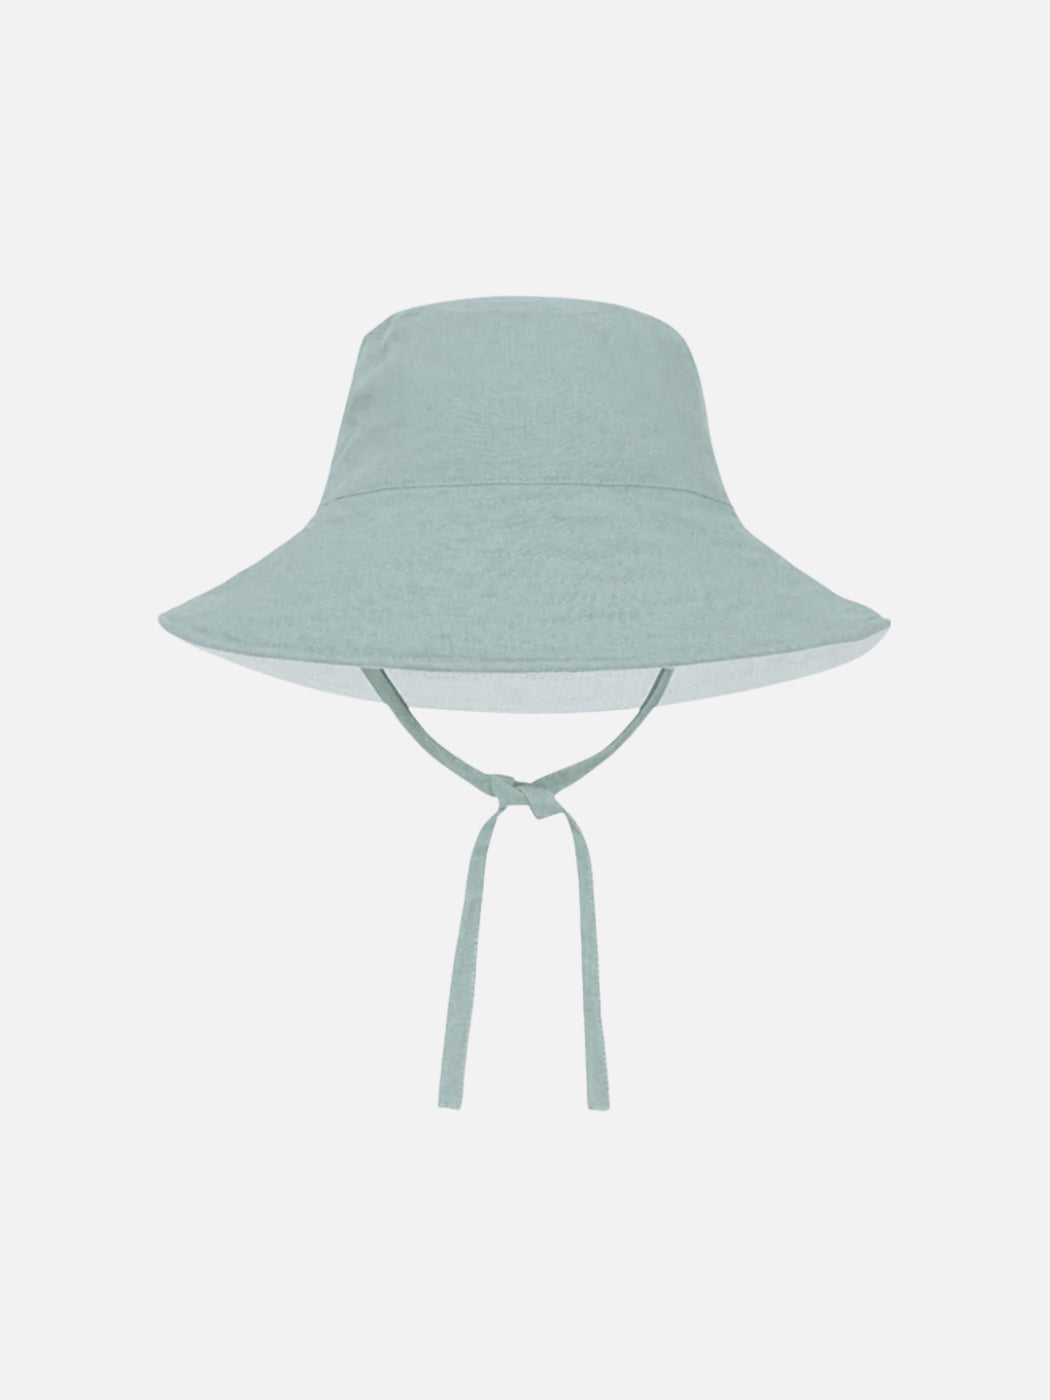 Summer and Storm blue linen sunhat with a wire rim and ties under the chin